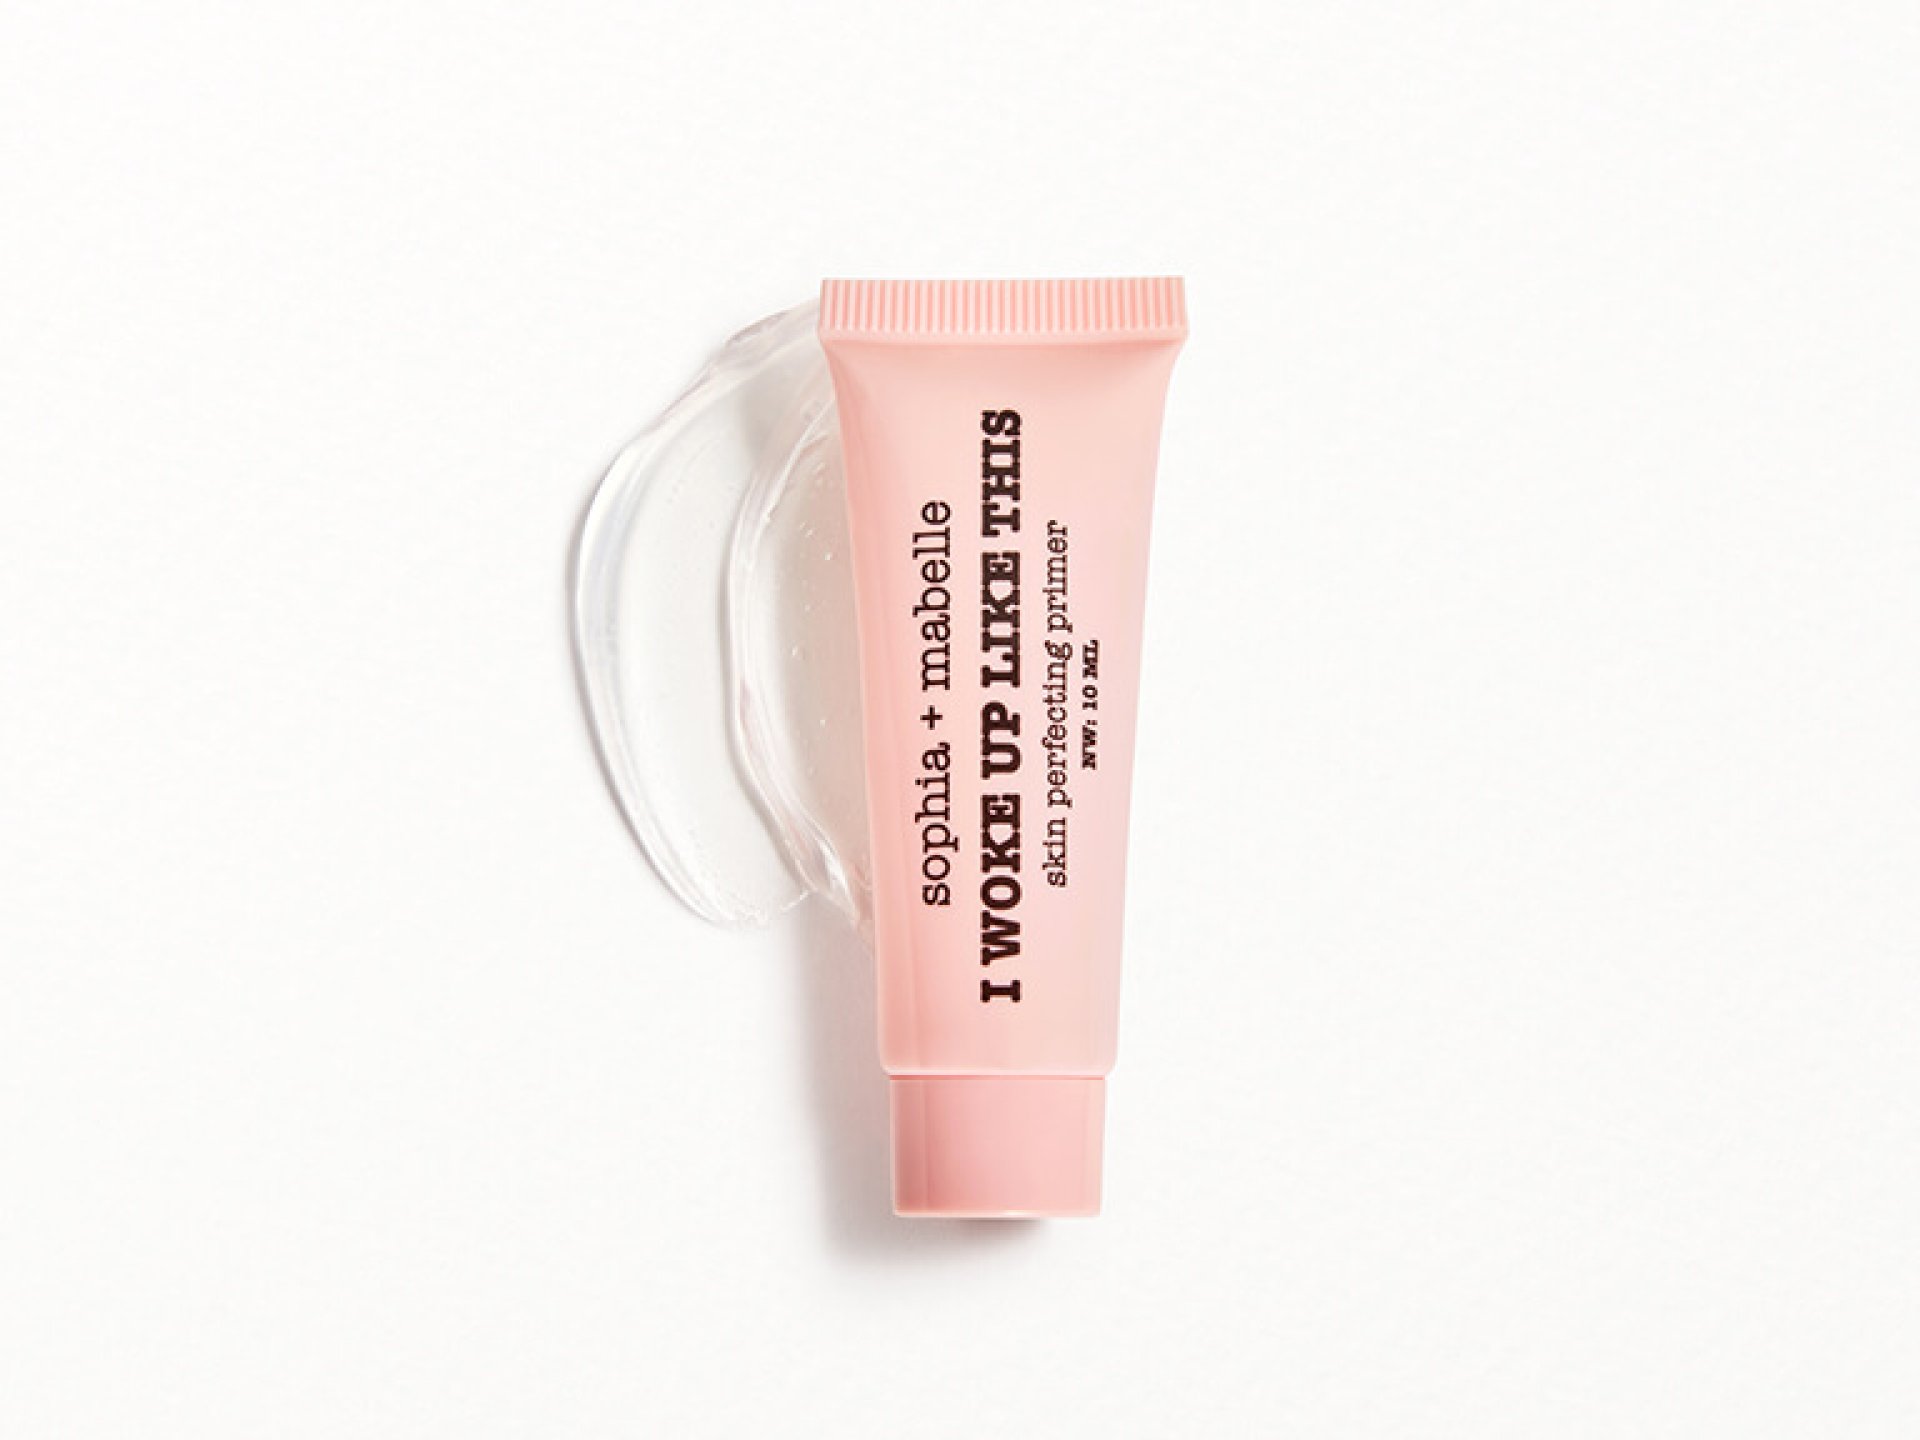 SOPHIA + MABELLE I Woke Up Like This - Skin Perfecting Primer in Clear